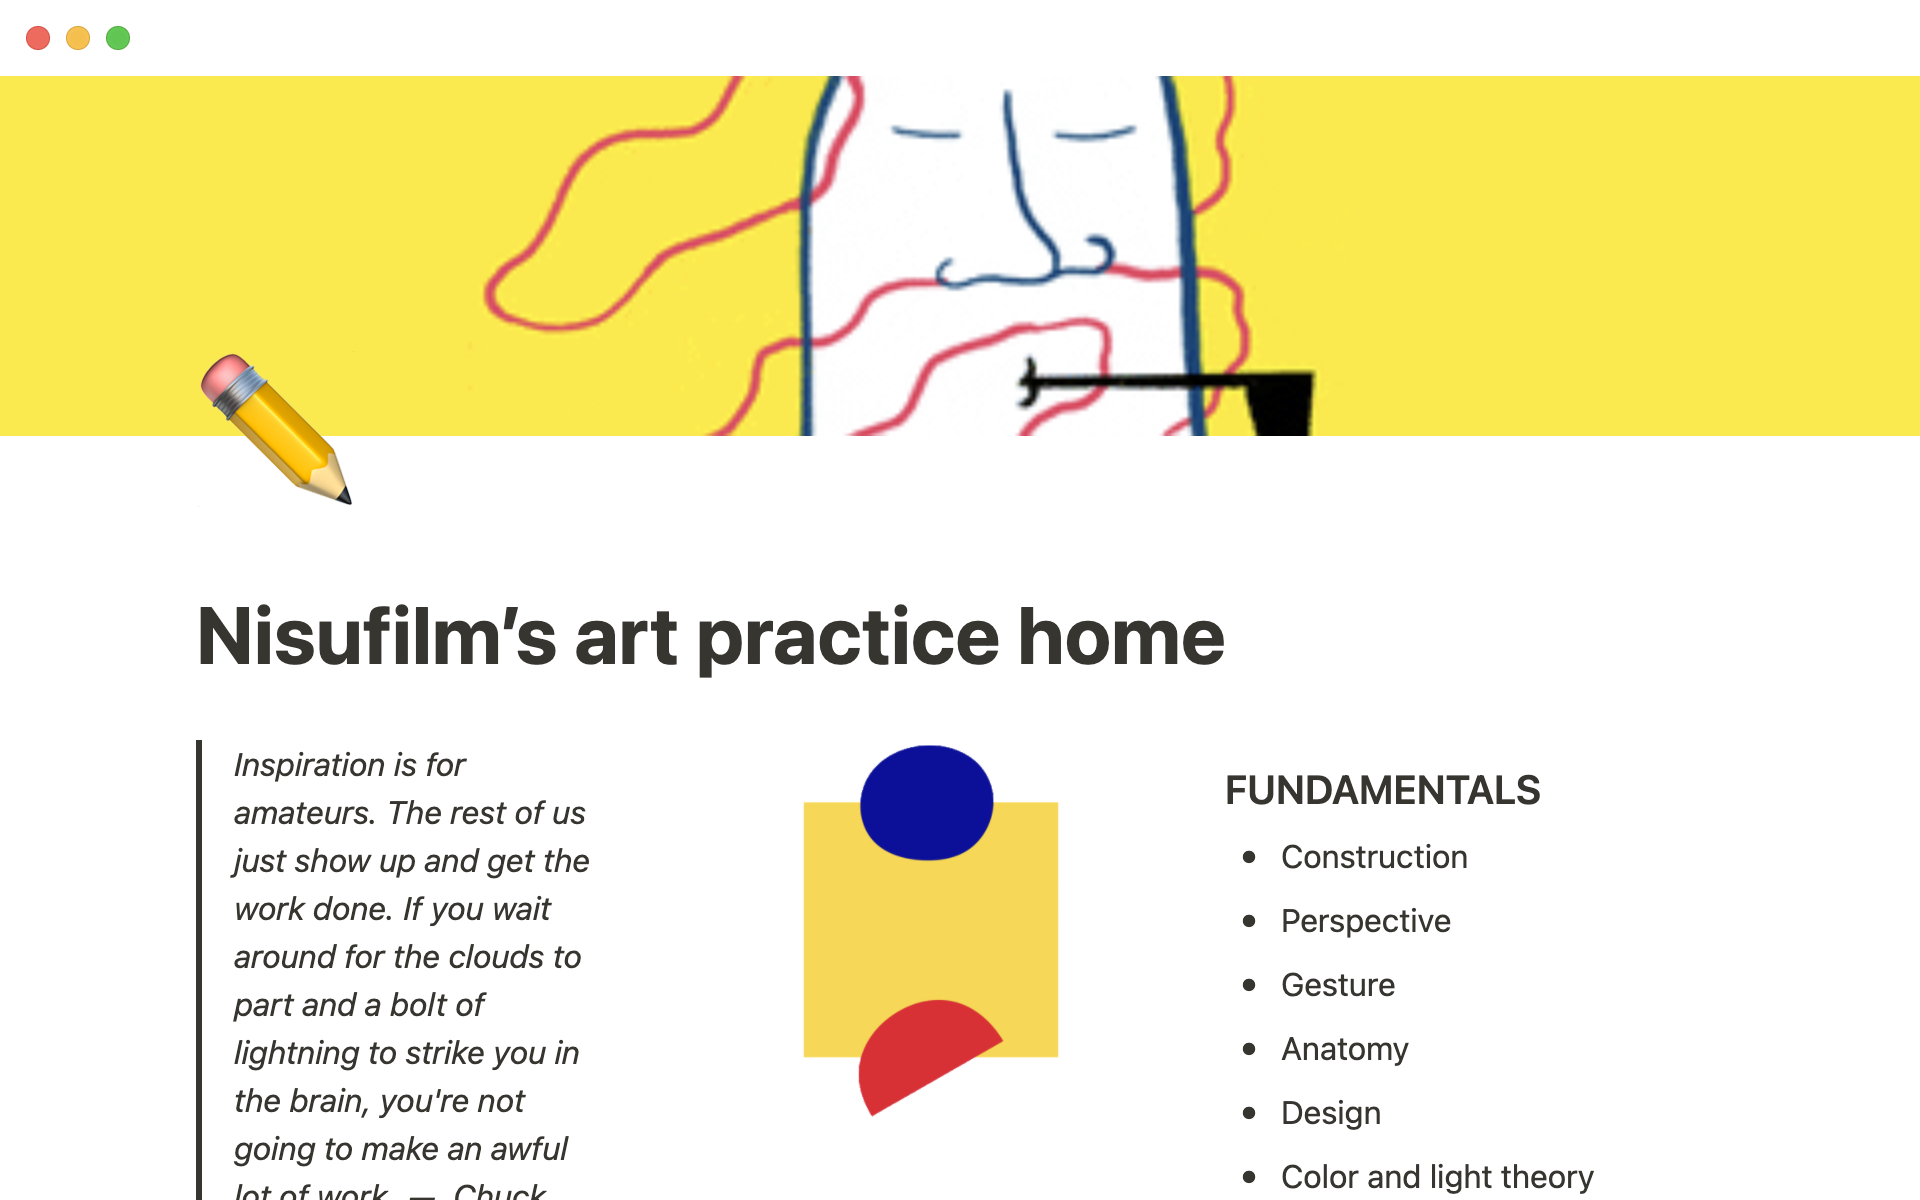 Keep track of all your art learning resources and inspiration.